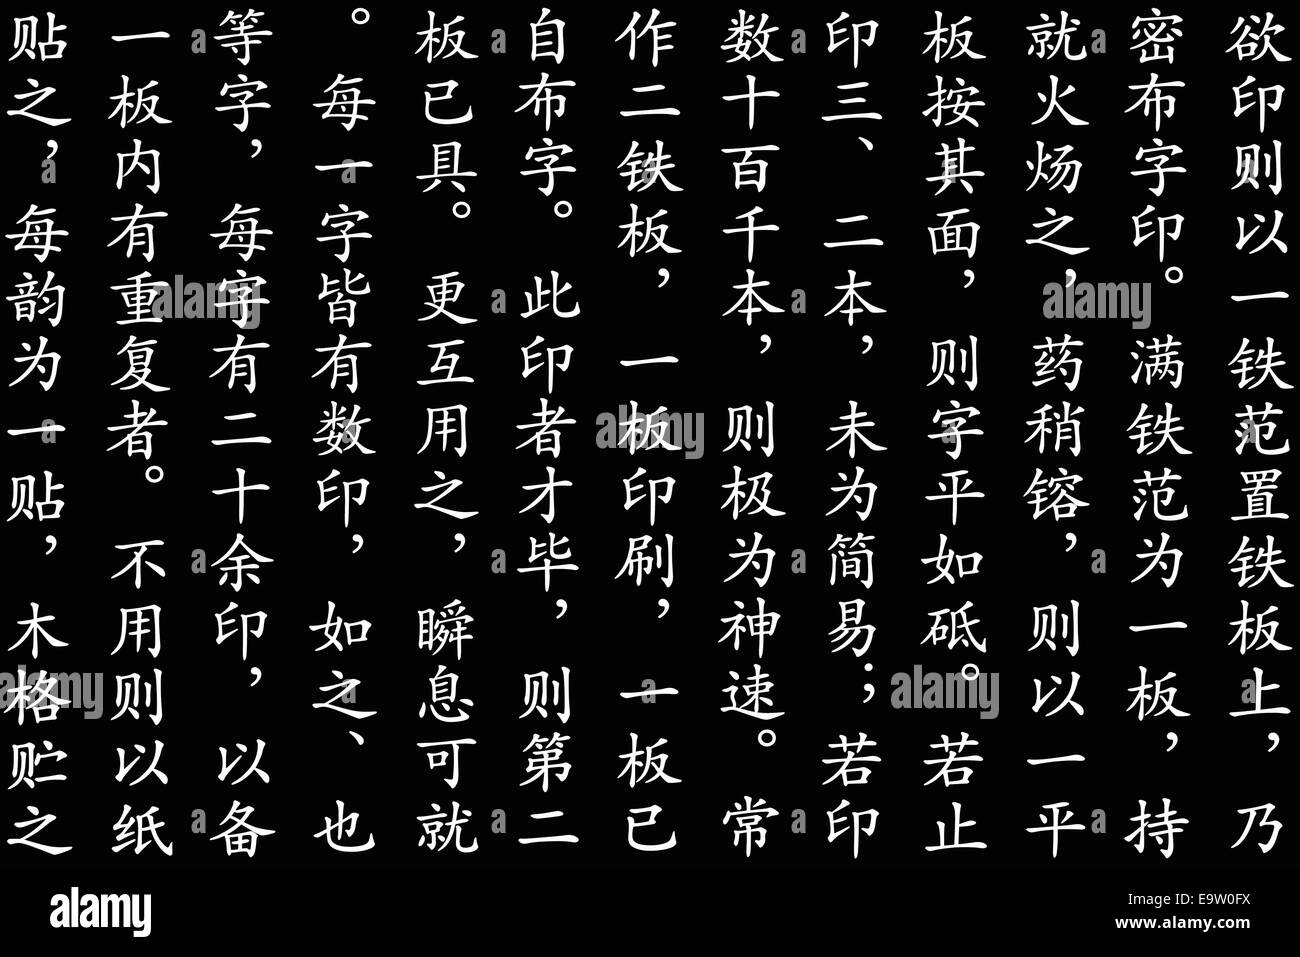 Chinese Script Pattern as oriental background, white characters on black background Stock Photo